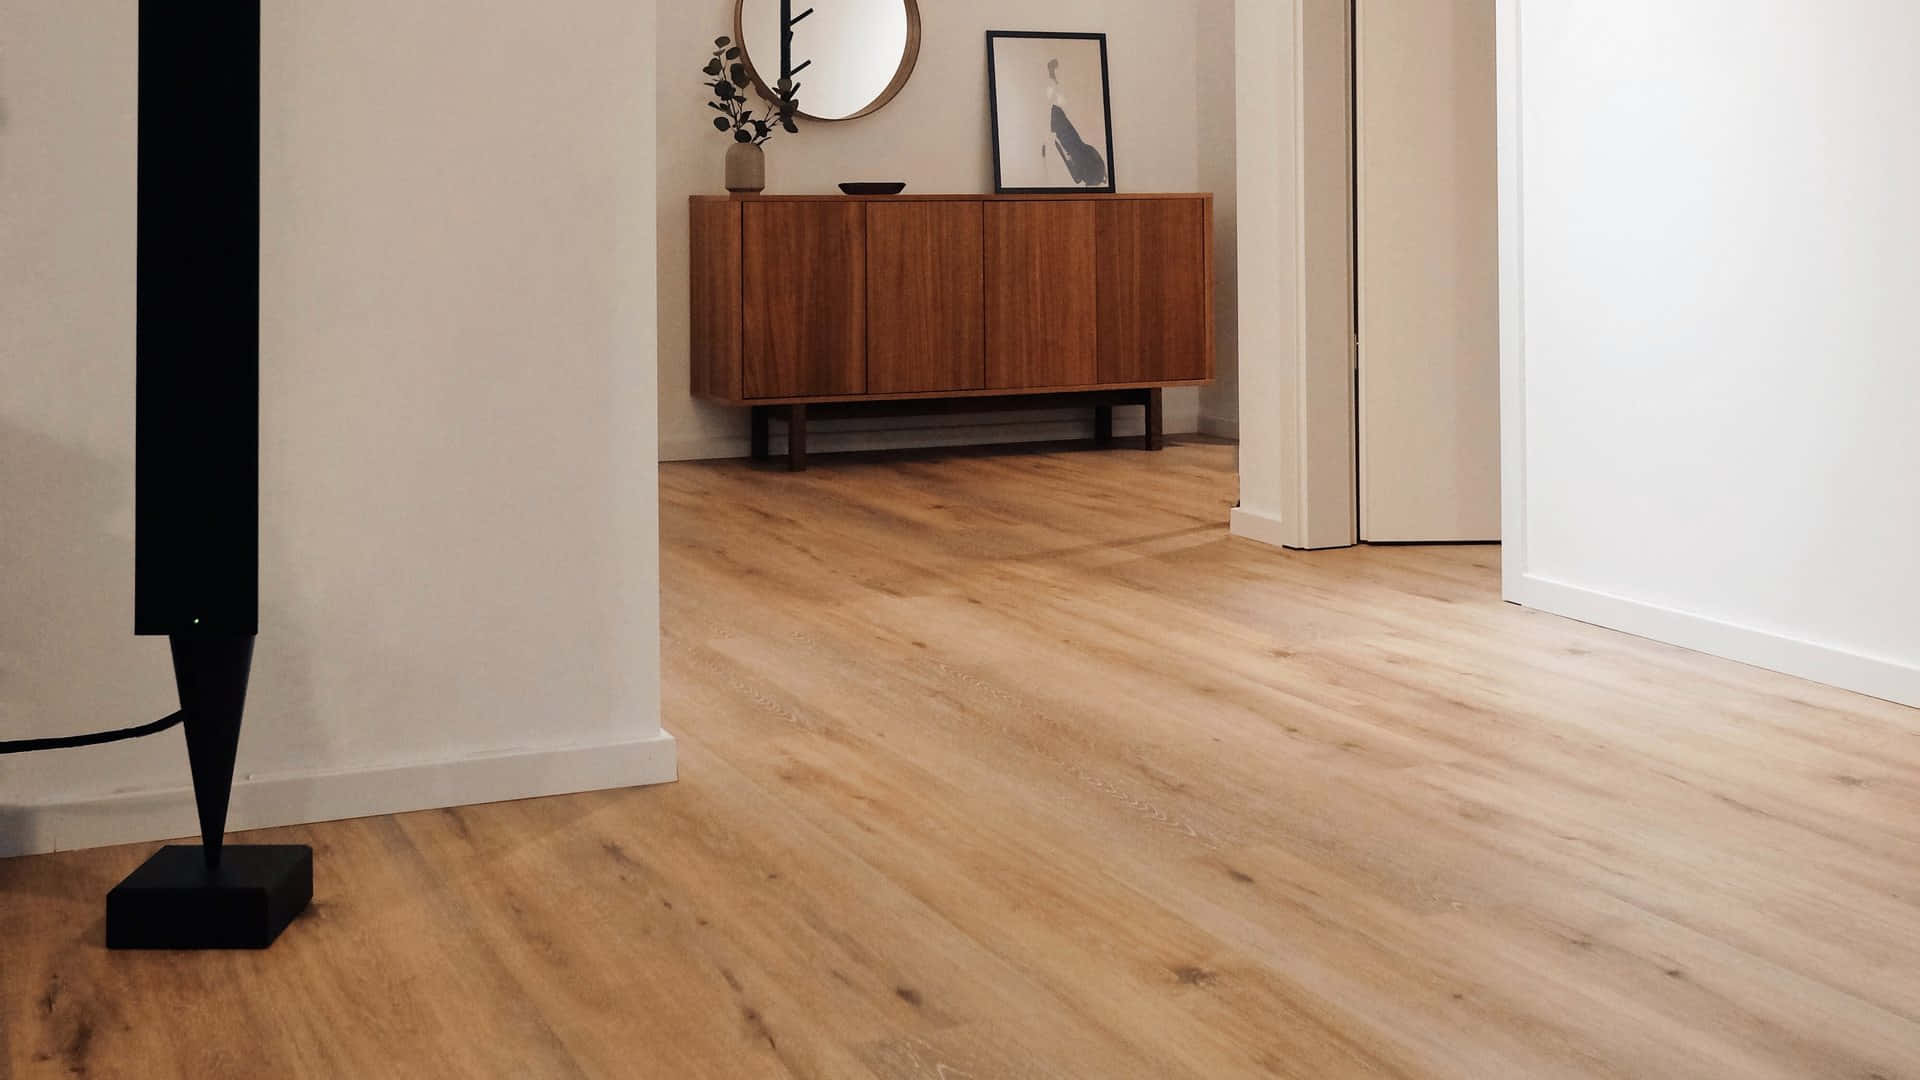 "Take Your Room Design To The Next Level With Natural Wood Flooring"